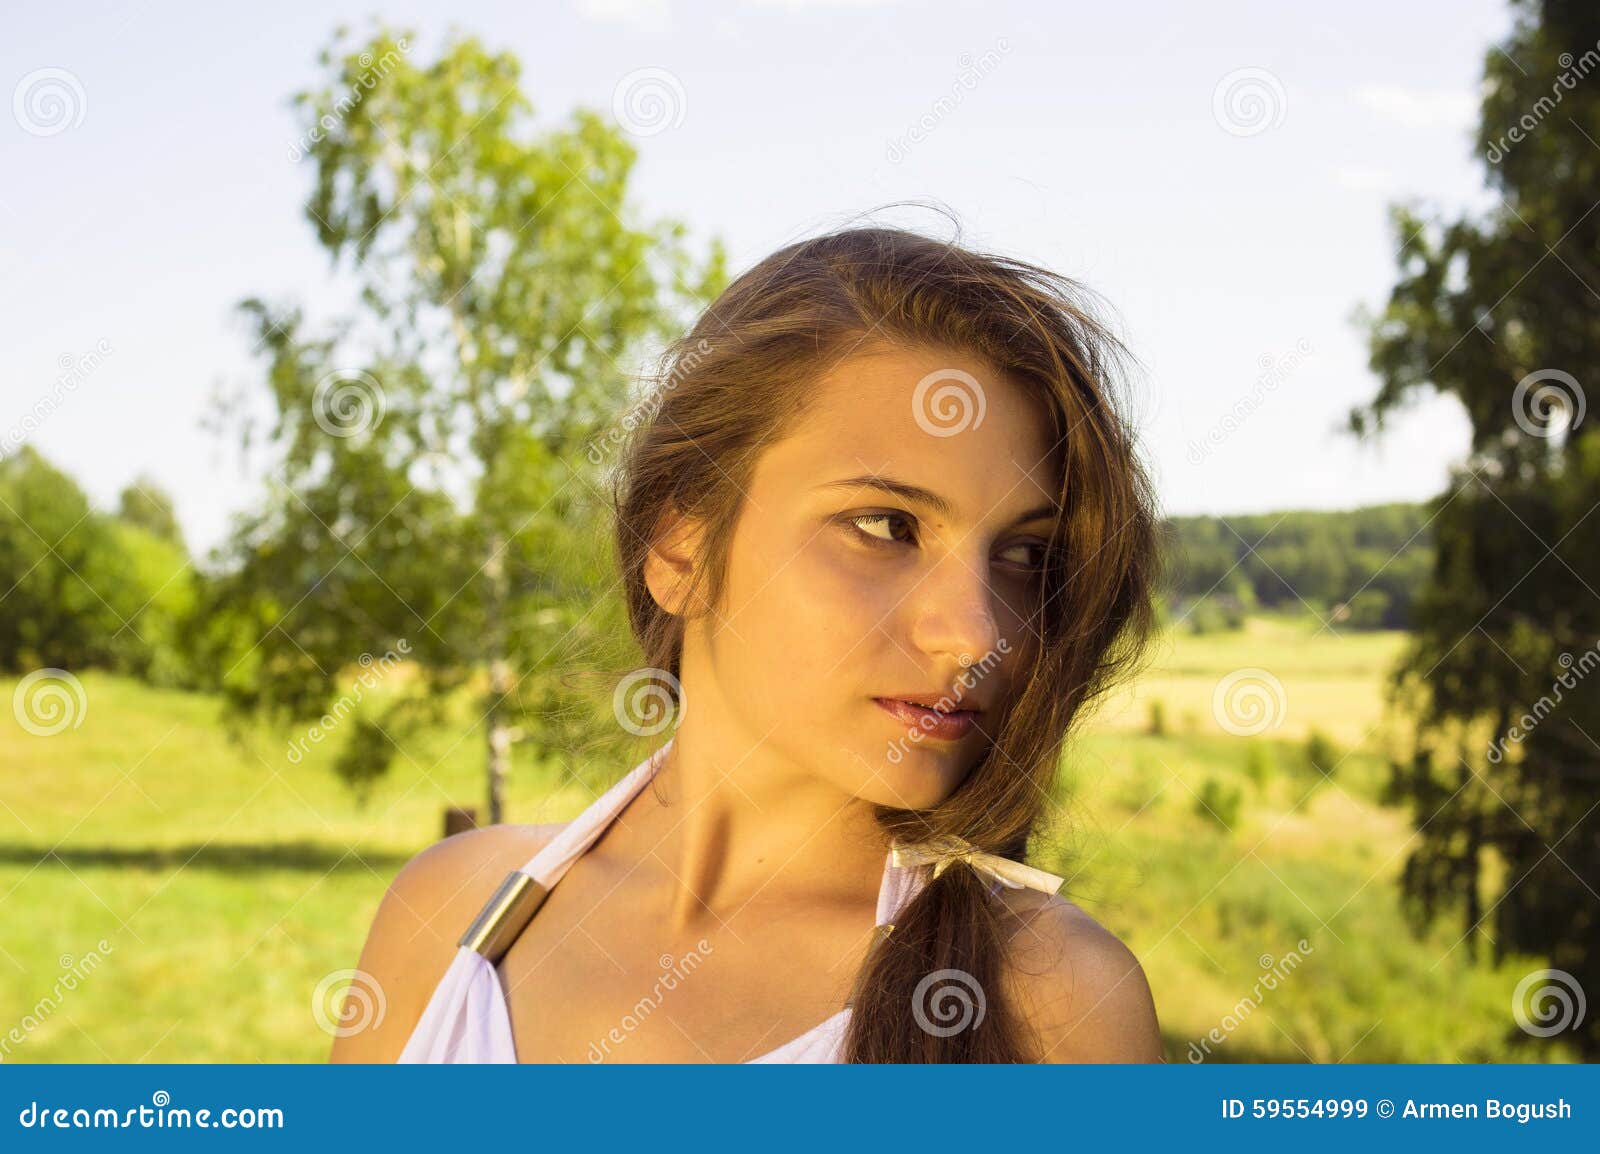 Teen Girl Dressed In Casual Short Dress Stock Image